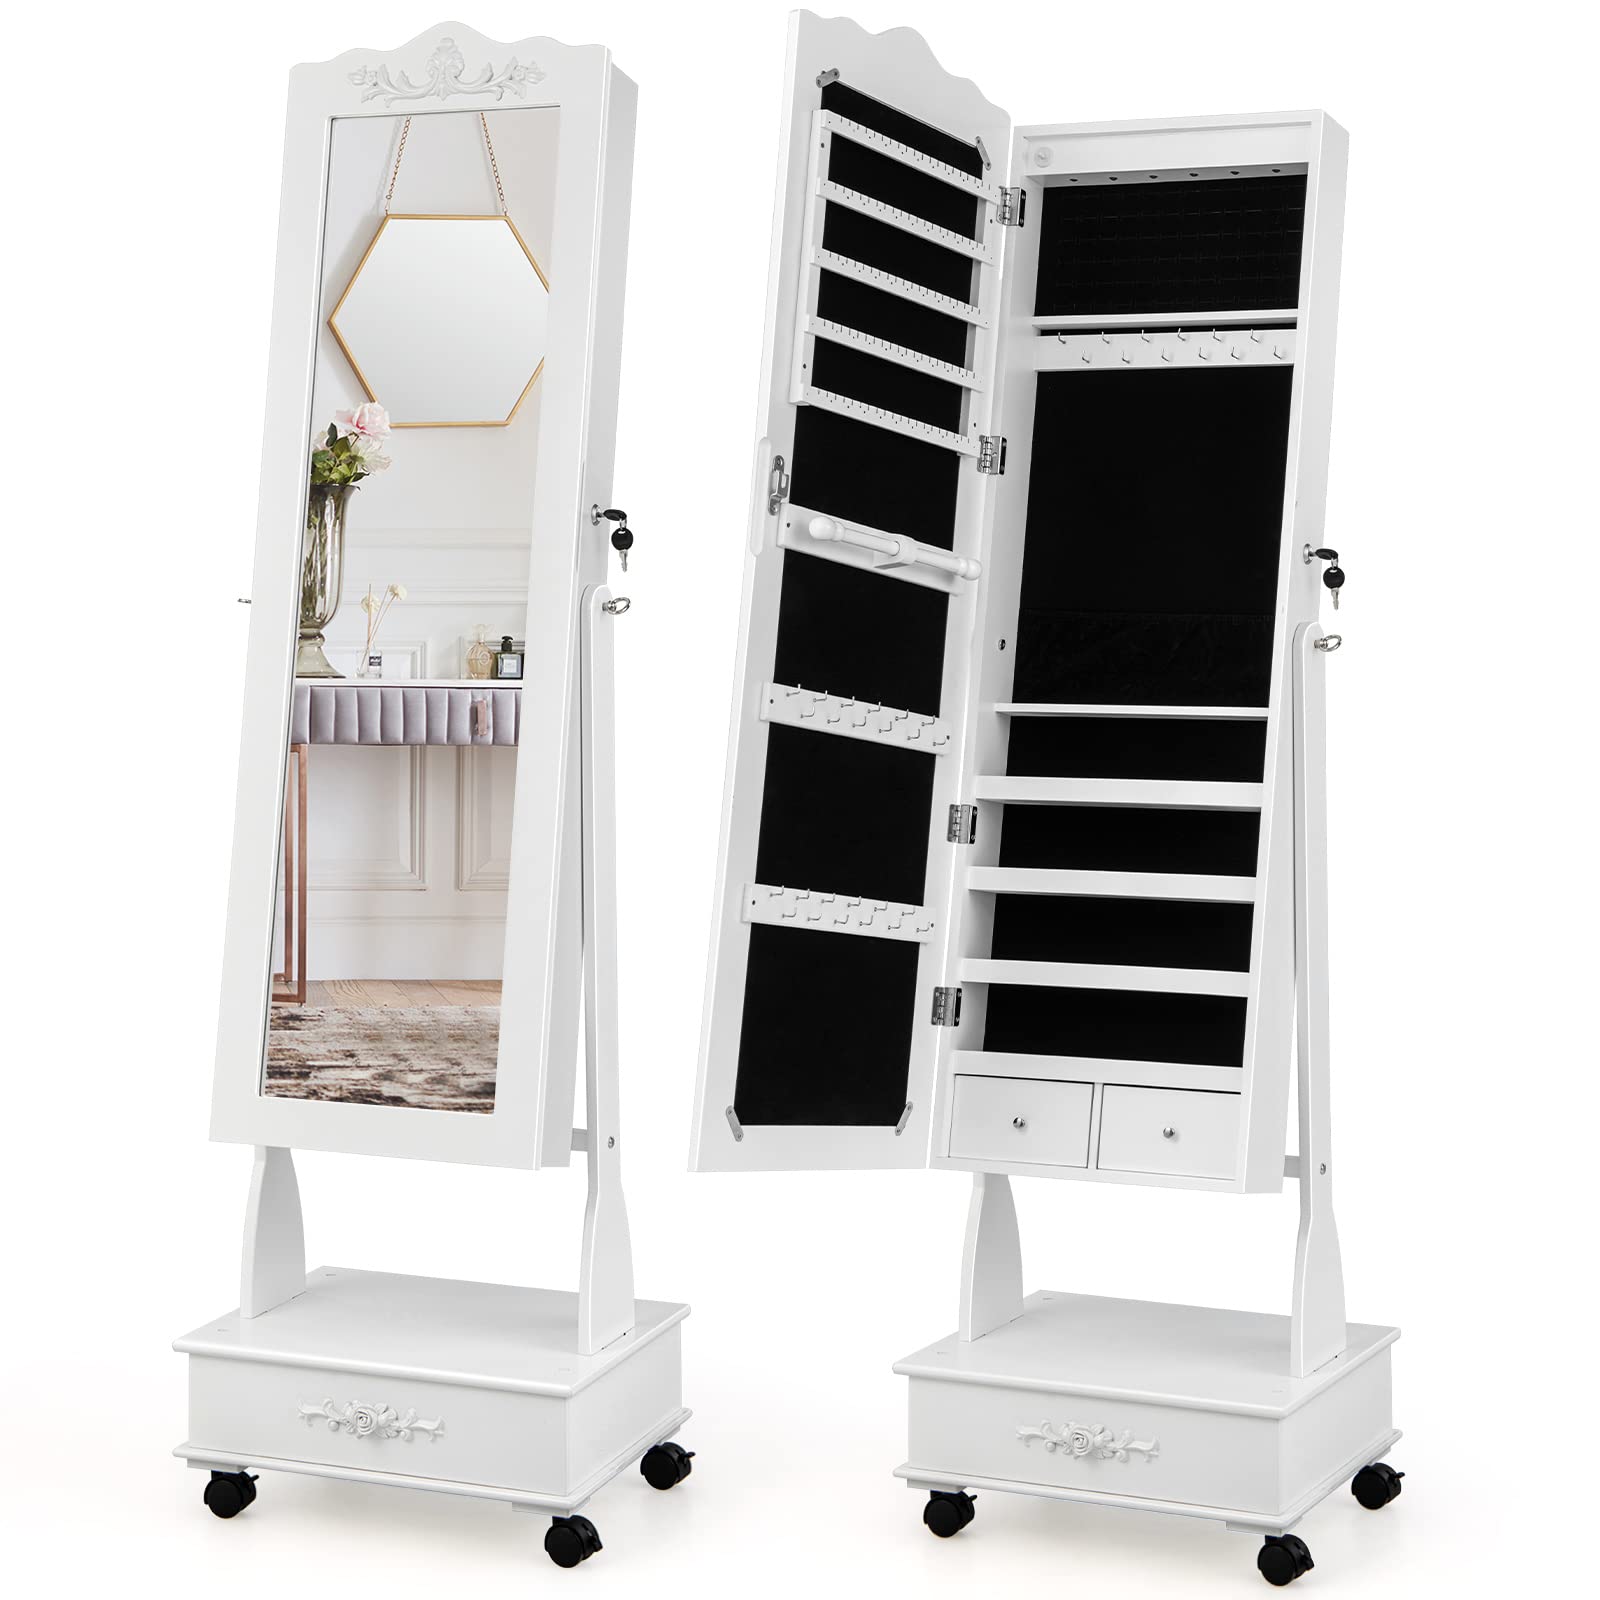 CHARMAID 6 LEDs Rolling Jewelry Cabinet with High Full Length Mirror, Lockable Standing Jewelry Armoire with Wheels